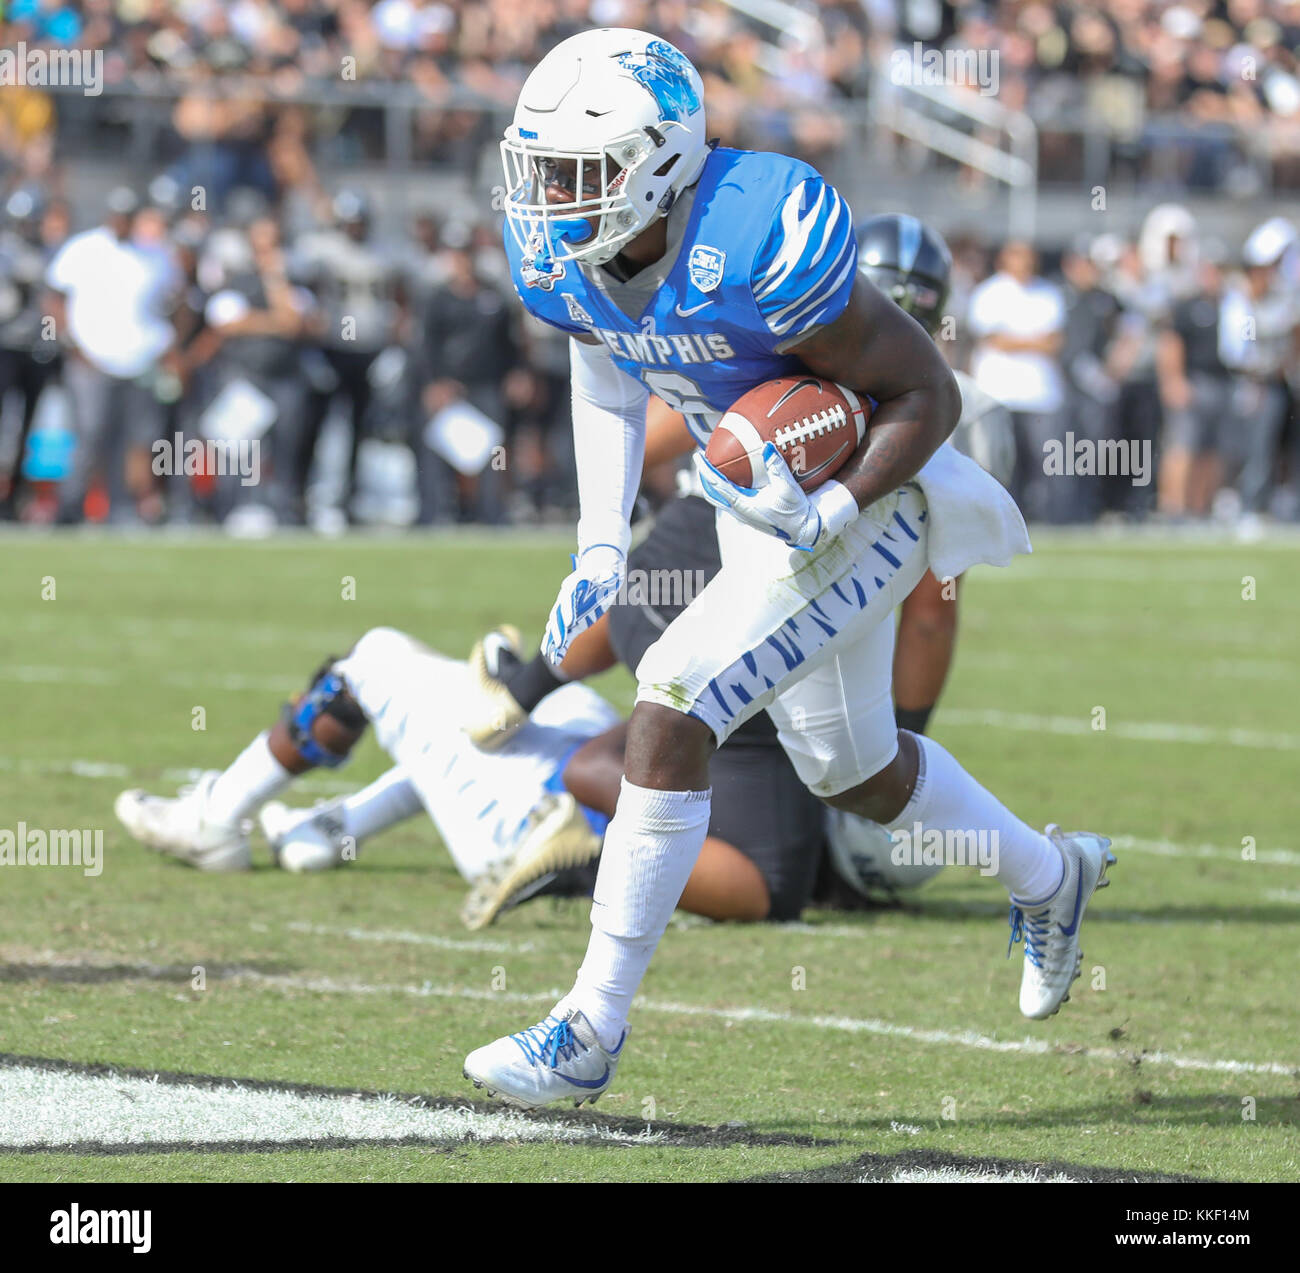 Orlando, FL, USA. 2nd Dec, 2017. Memphis' Patrick Taylor Jr. #6 crosses the goal line to score a touchdown during the AAC Championship football game between the UCF Knights and the Memphis Tigers at the Spectrum Stadium in Orlando, FL. Kyle Okita/CSM/Alamy Live News Stock Photo